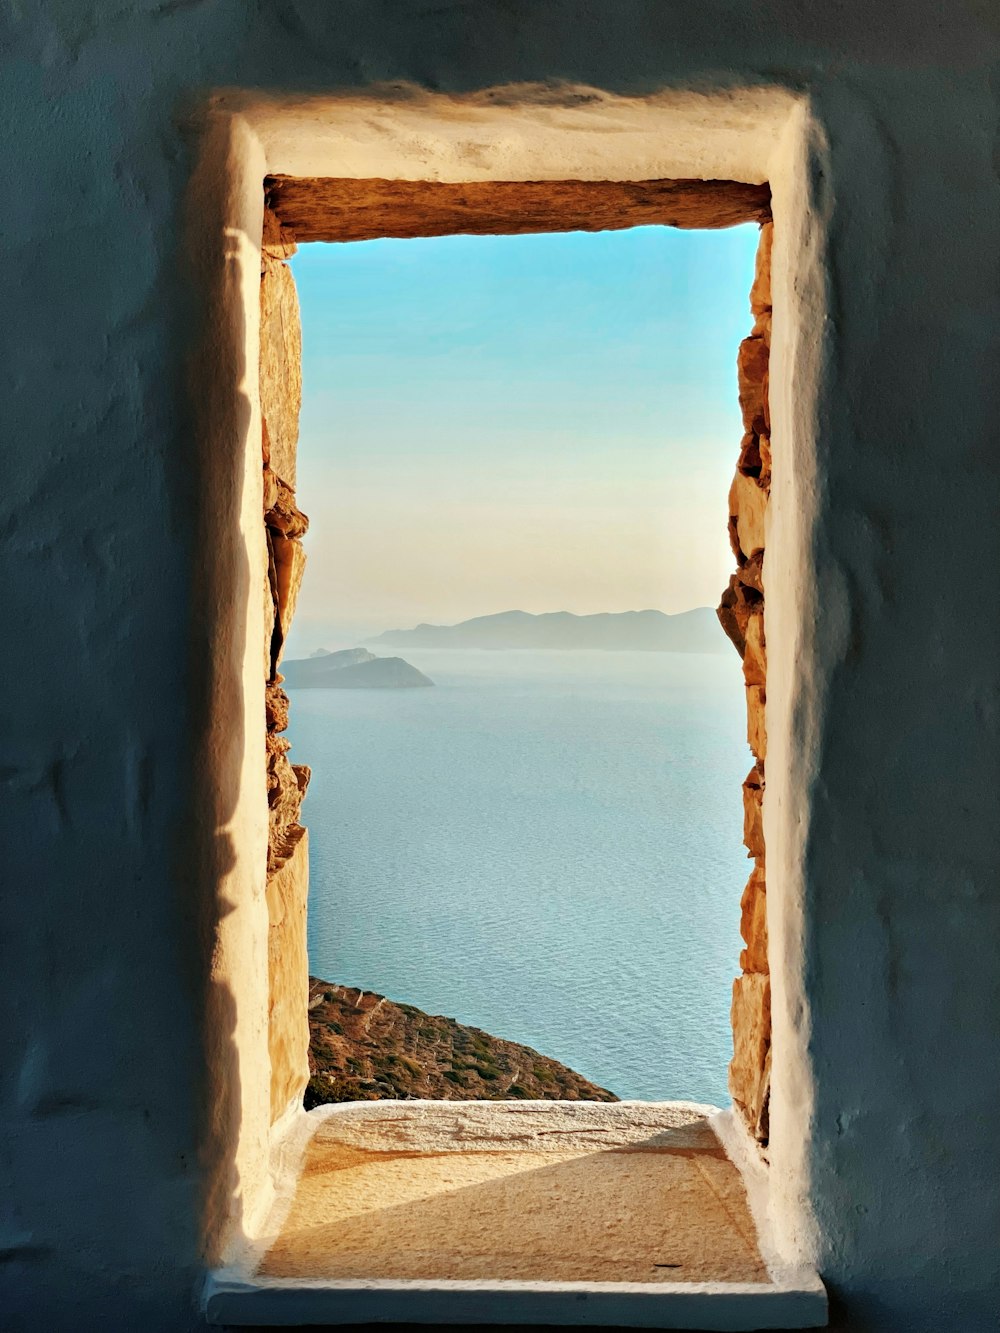 a window looking out to the ocean